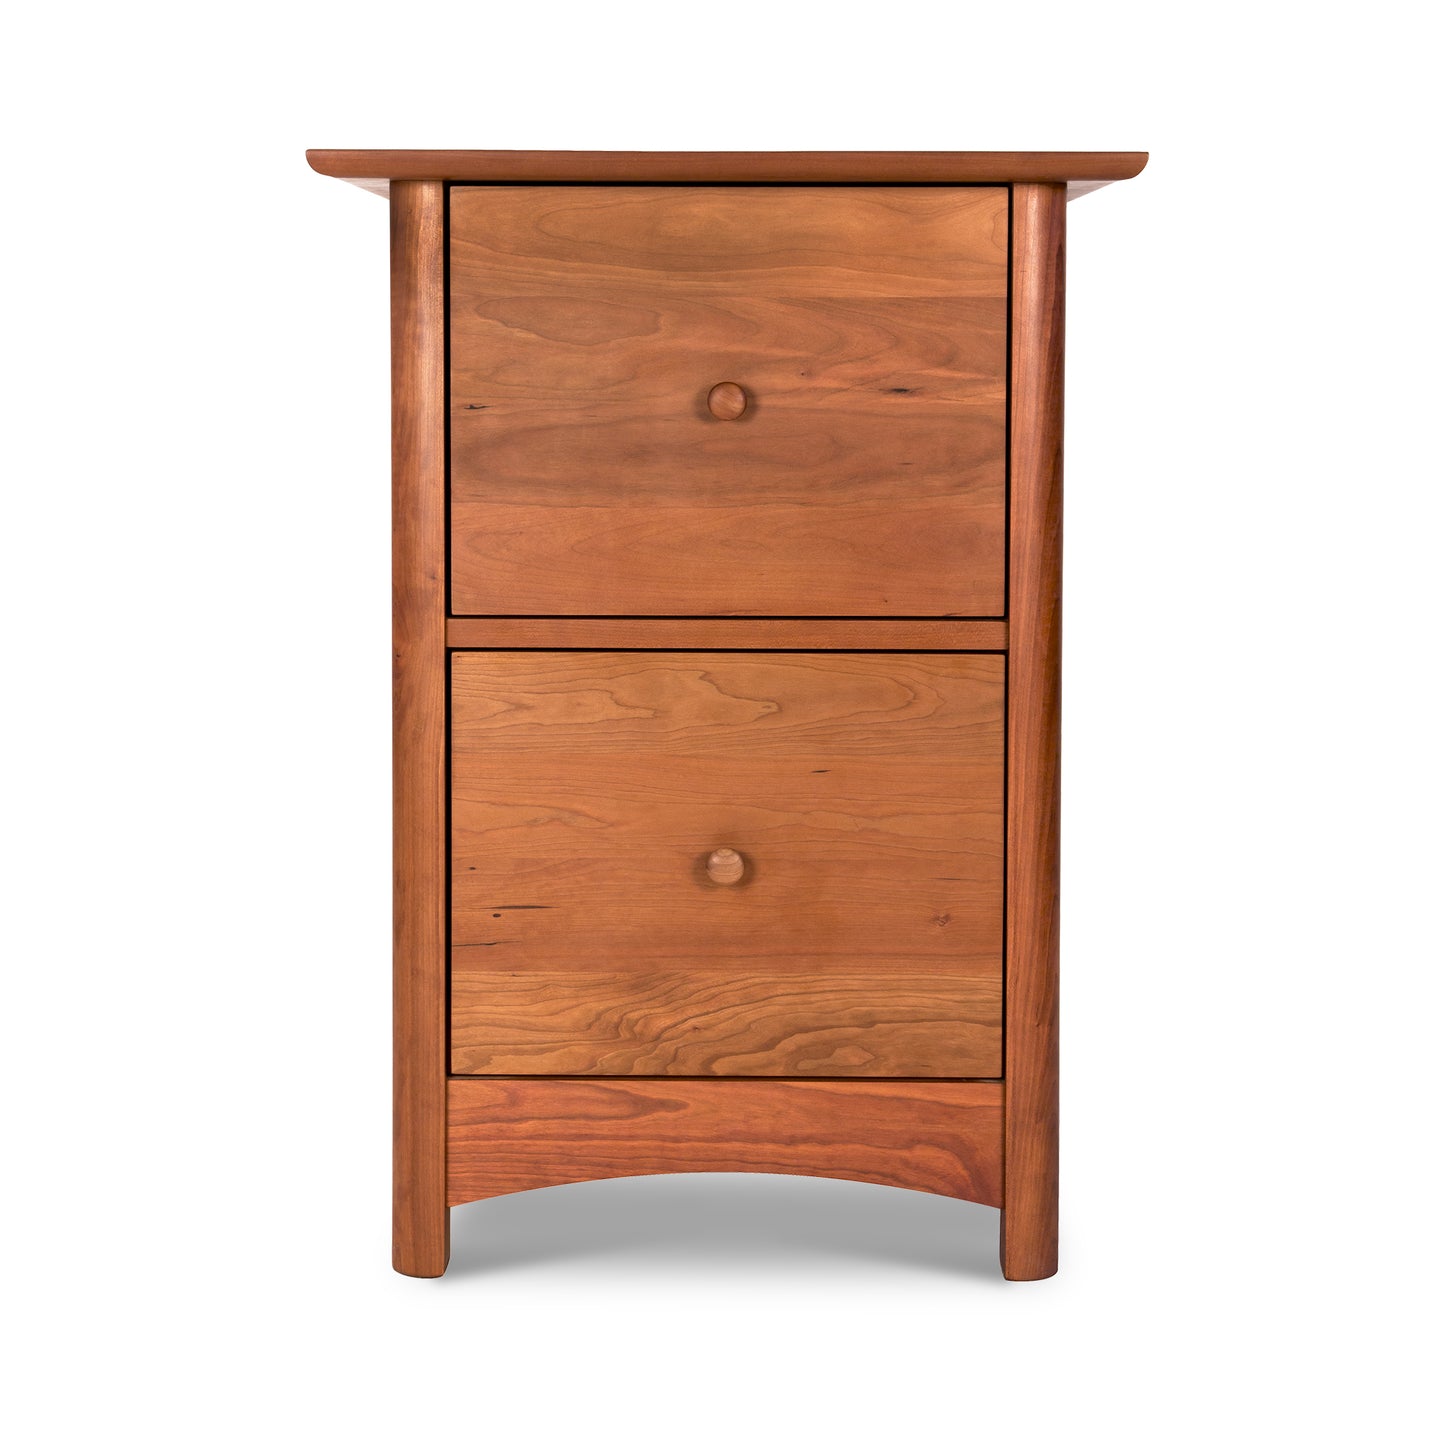 A Heartwood Shaker 2-Drawer Vertical File Cabinet made by Vermont Furniture Designs, made of solid wood with two drawers.